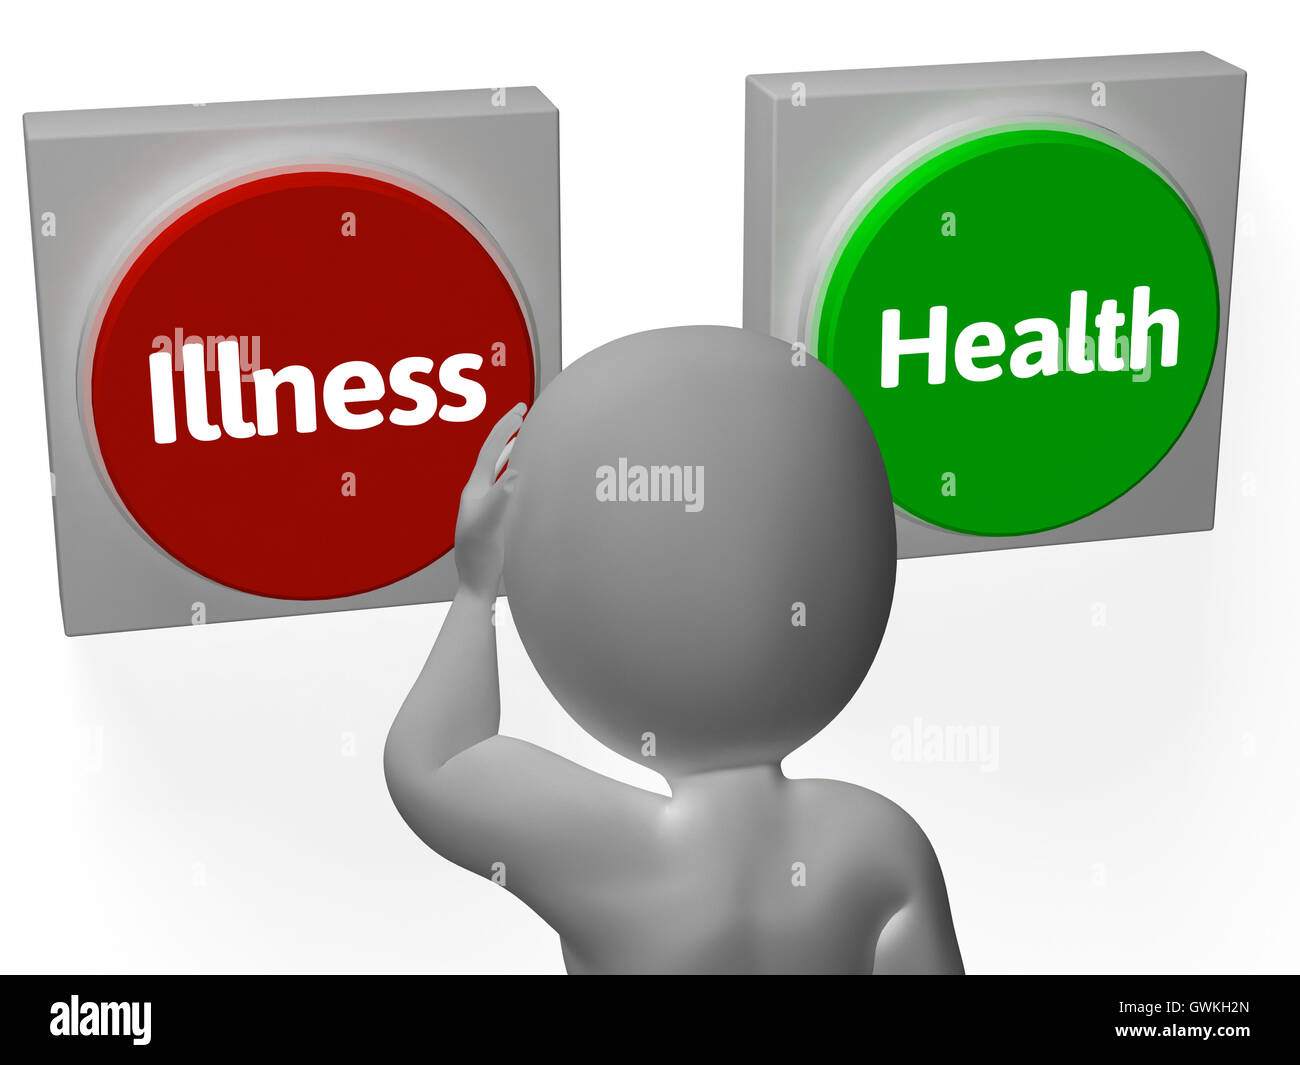 Illness Health Buttons Show Sickness Or Healthcare Stock Photo